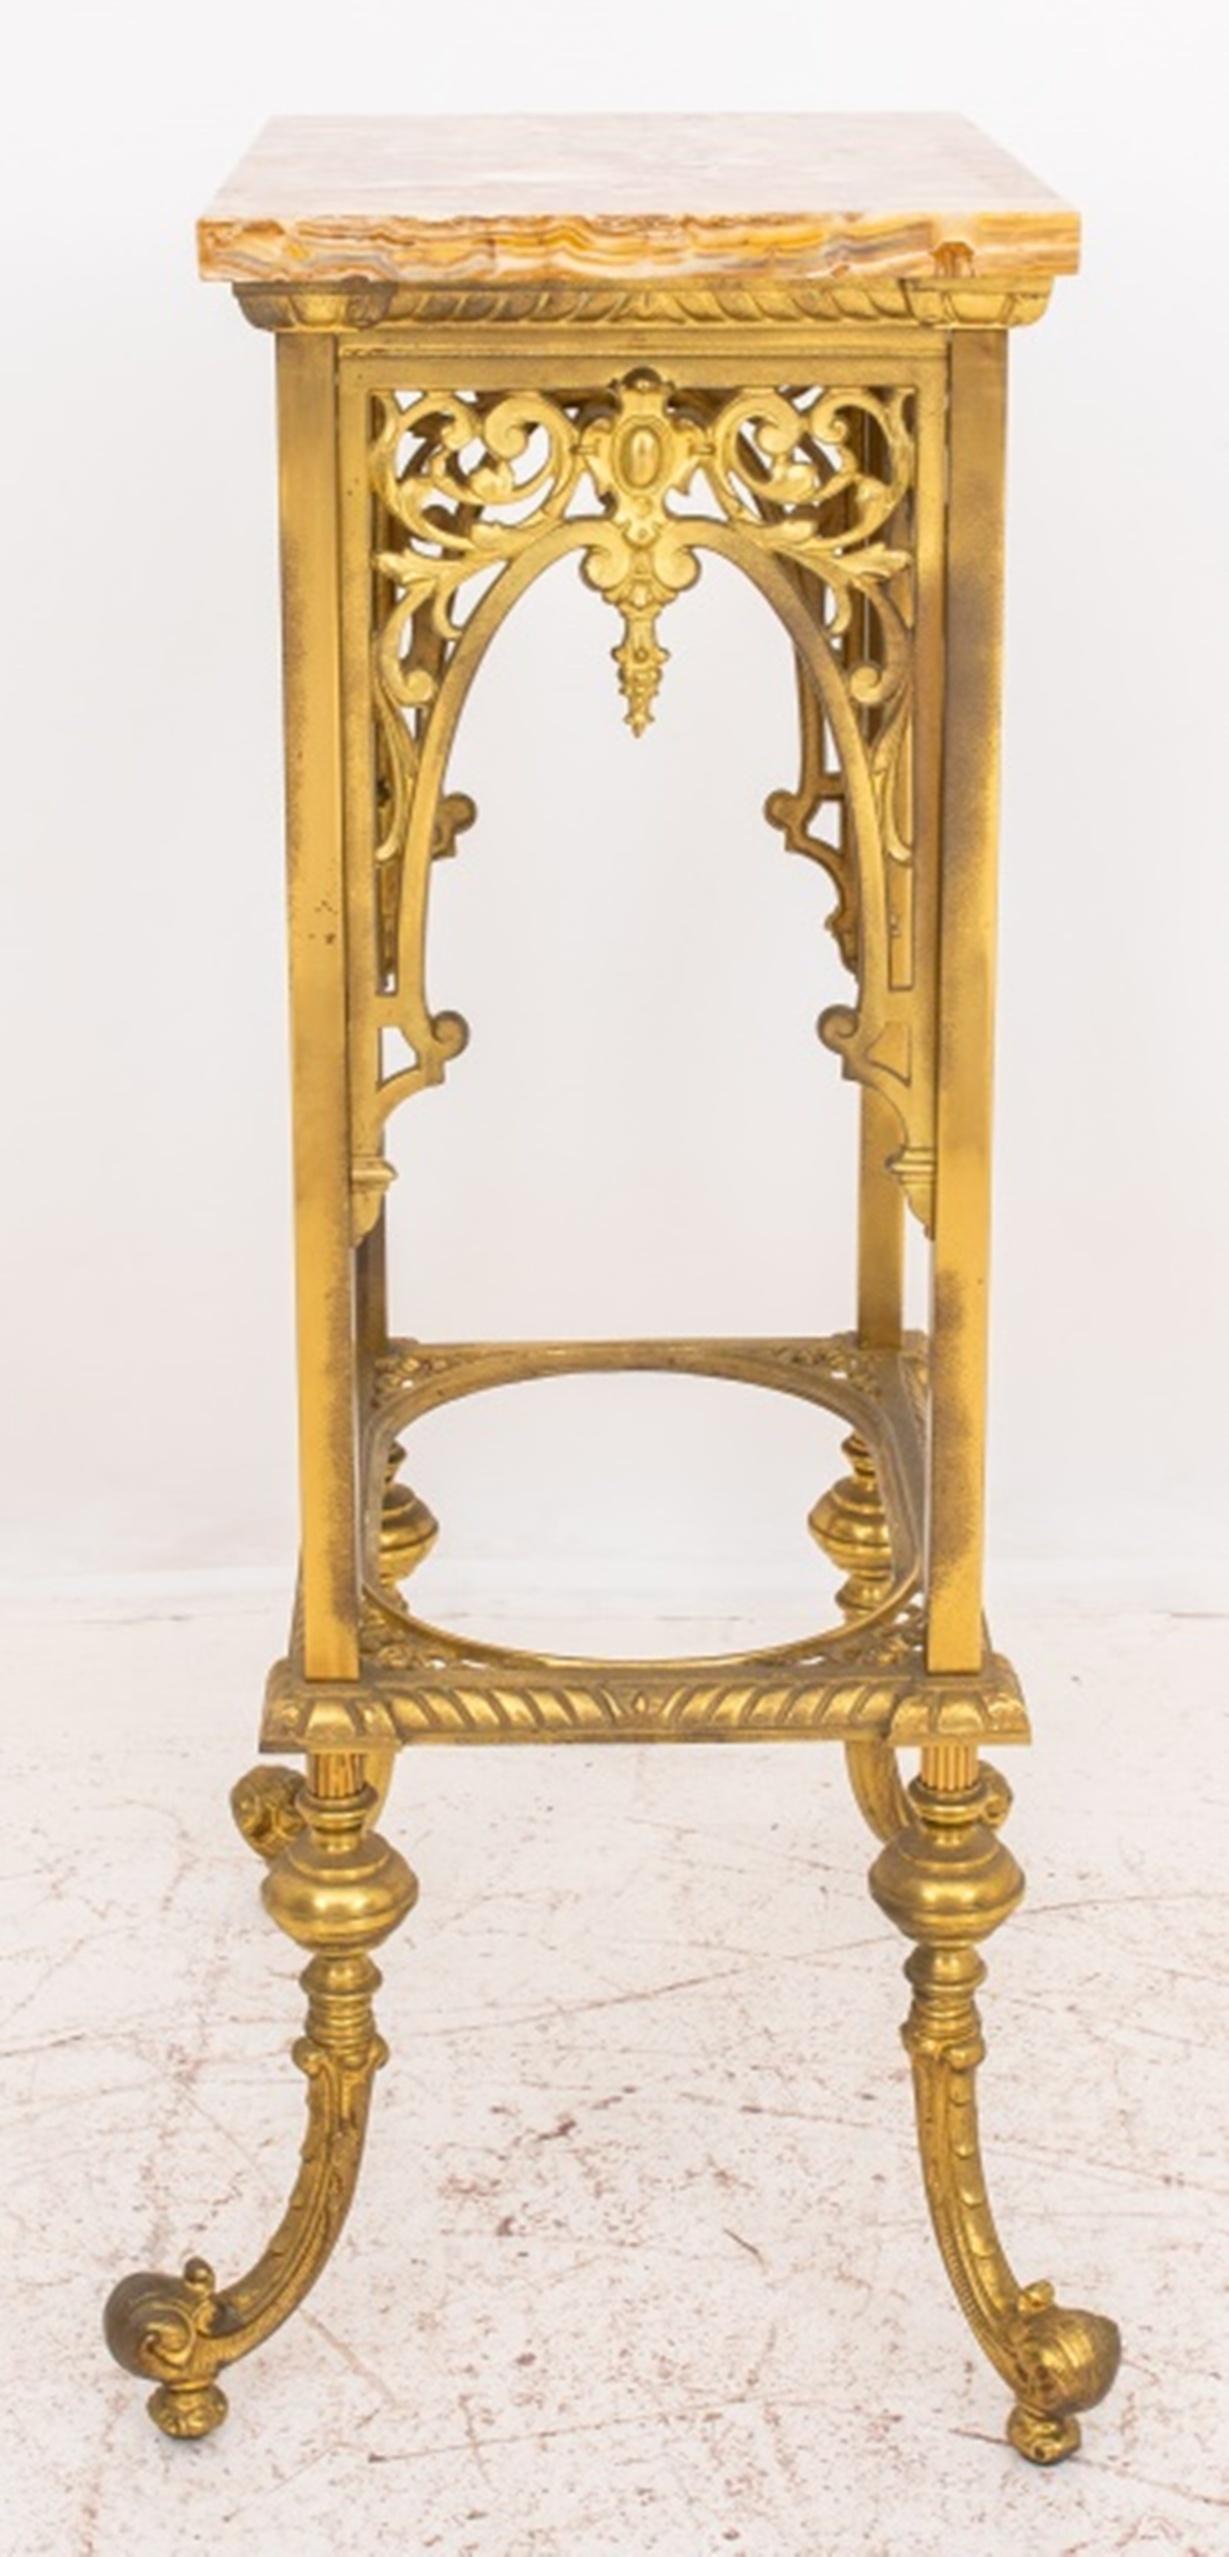  Early 20th C. Renaissance Revival Brass Side Table 4